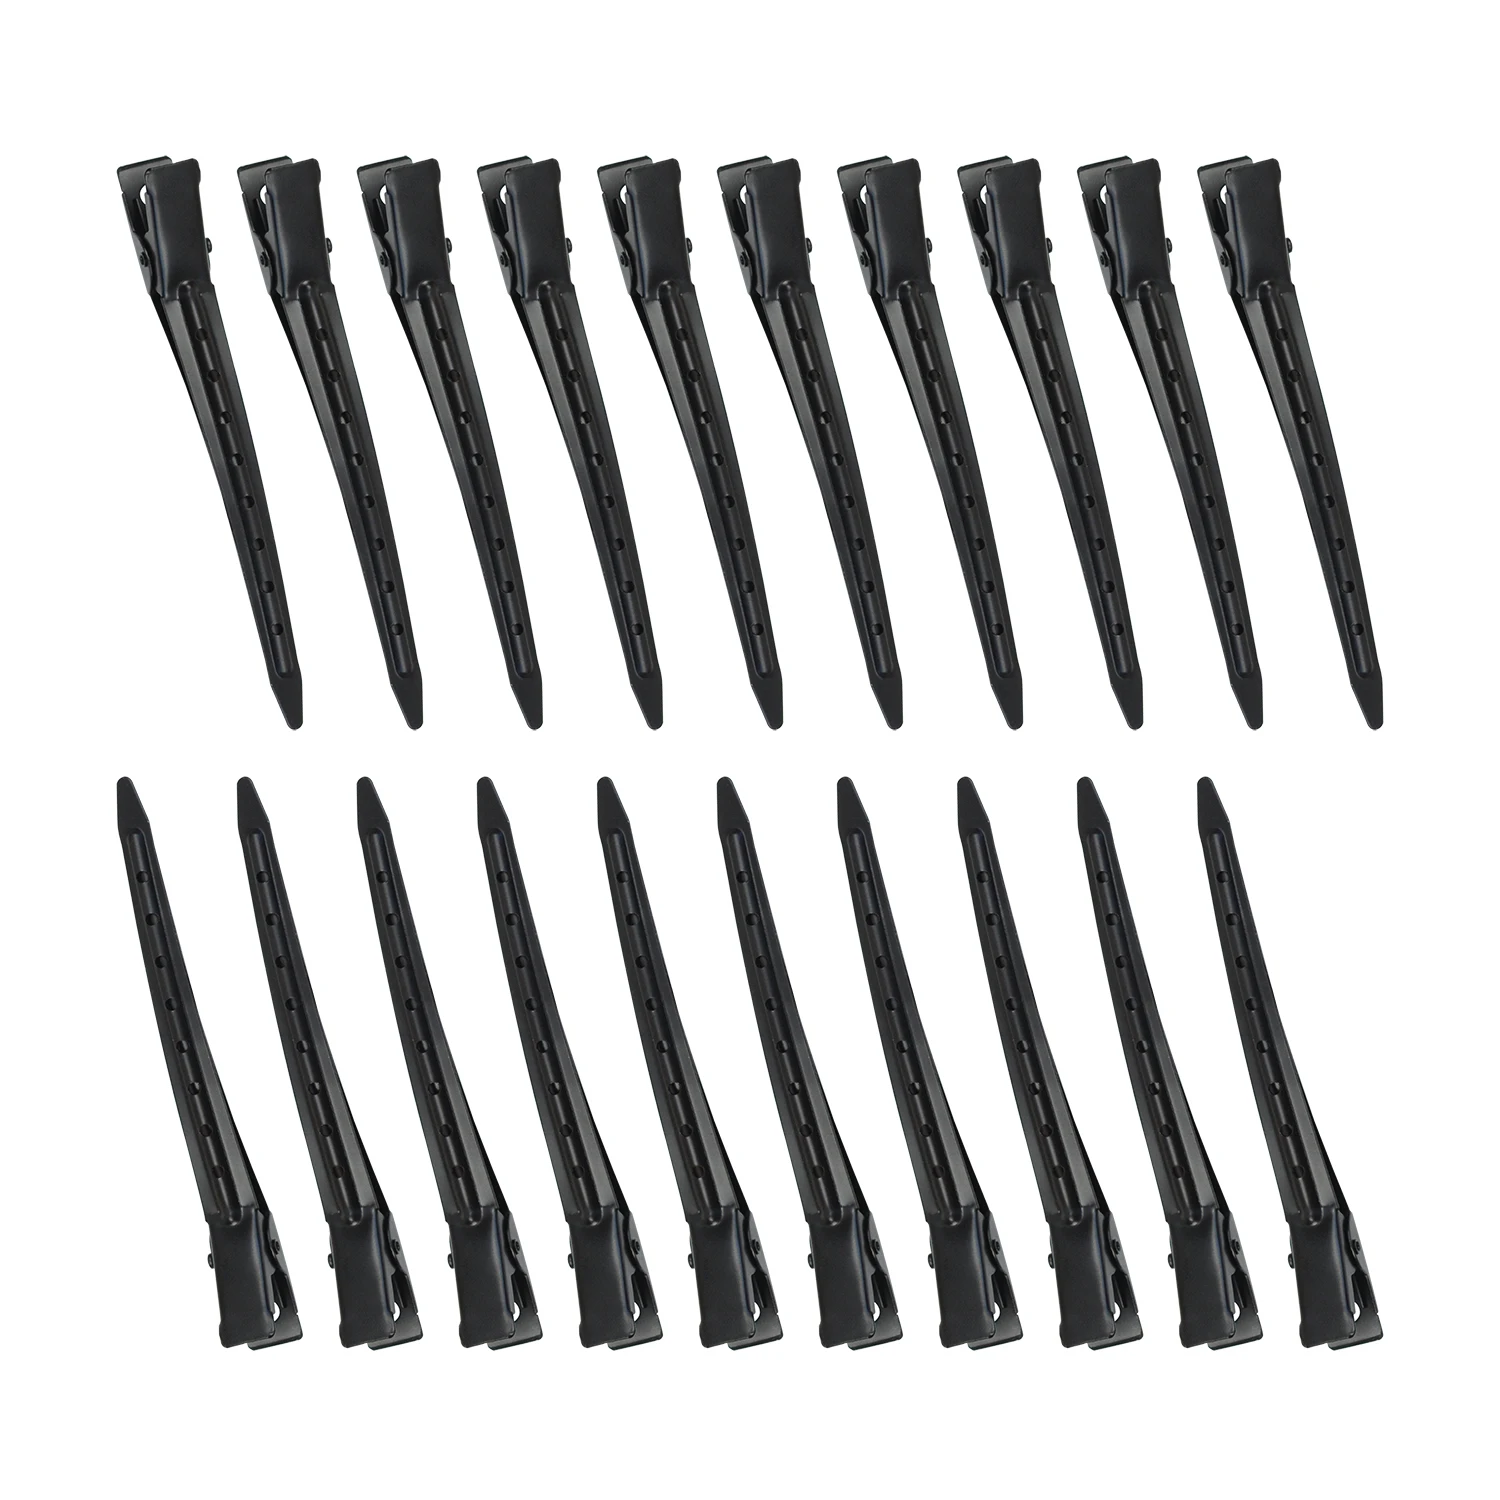 

40 Pcs 3.5 Inches Duck Bill Hair Clips Black Metal Alligator Curl Clips with Holes Styling Clips for Salon Hair Extensions